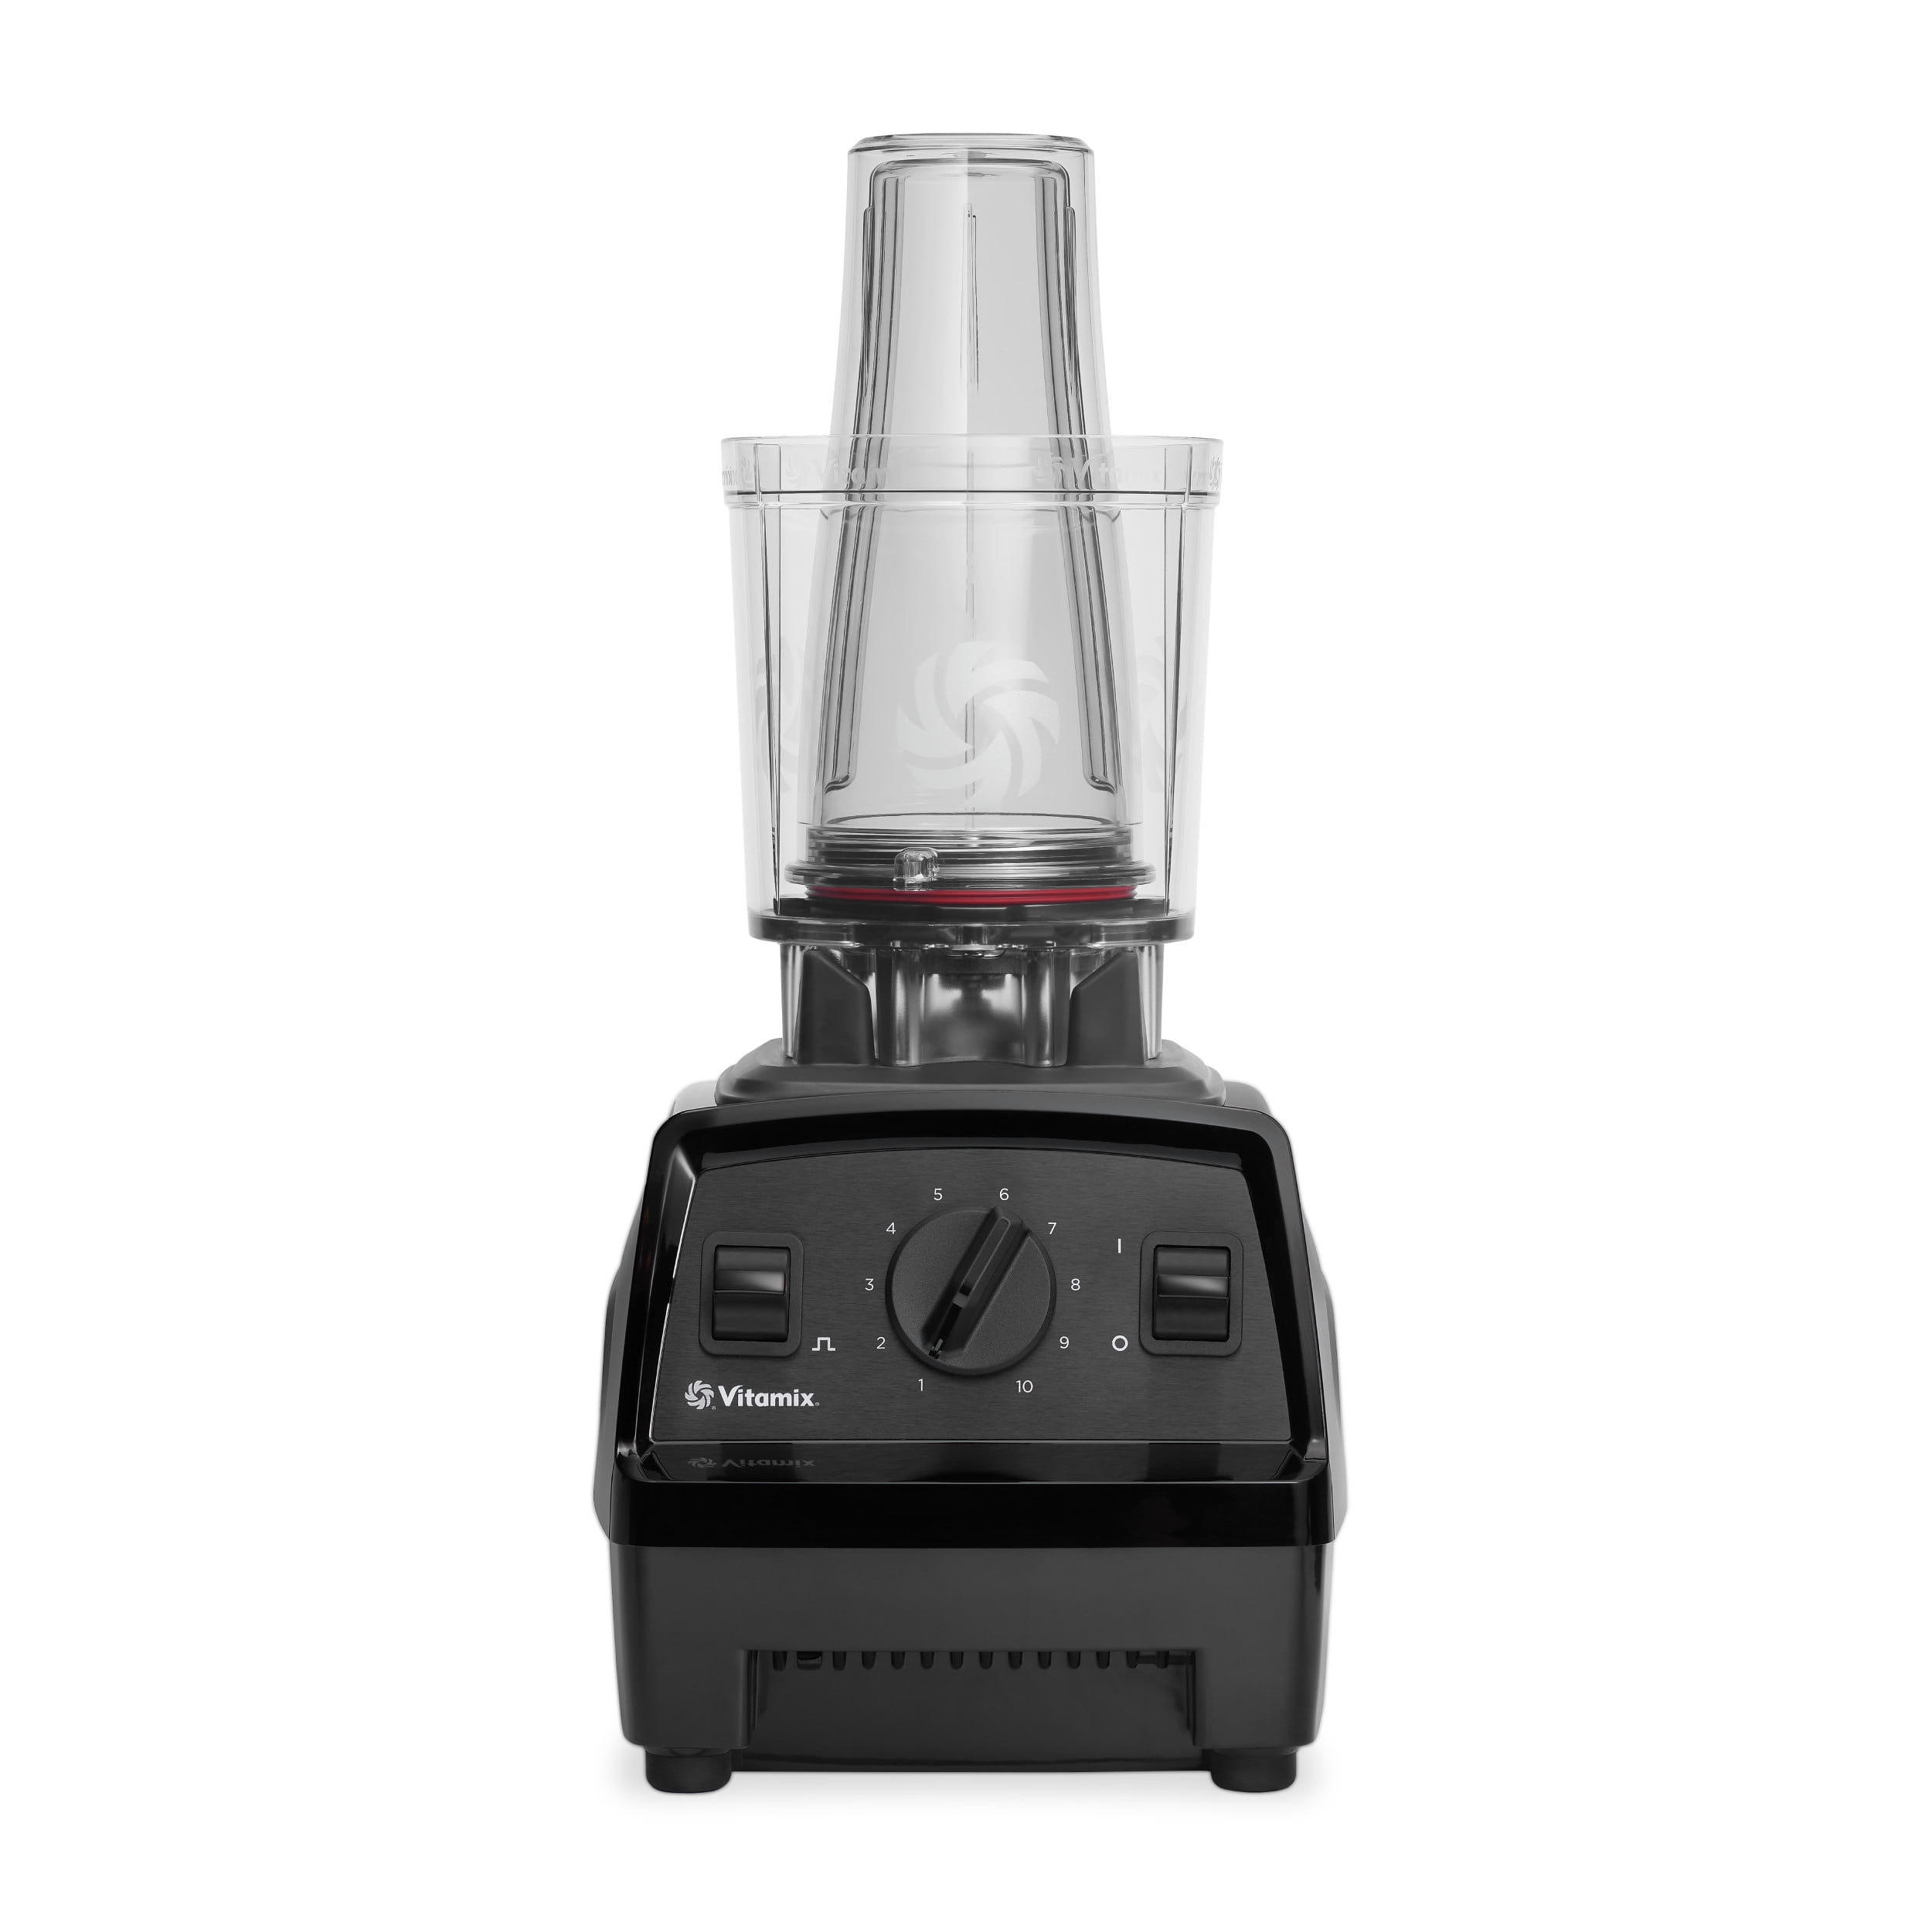 Vitamix 104125-1 Personal Cup Adapter Blender Great for sale online